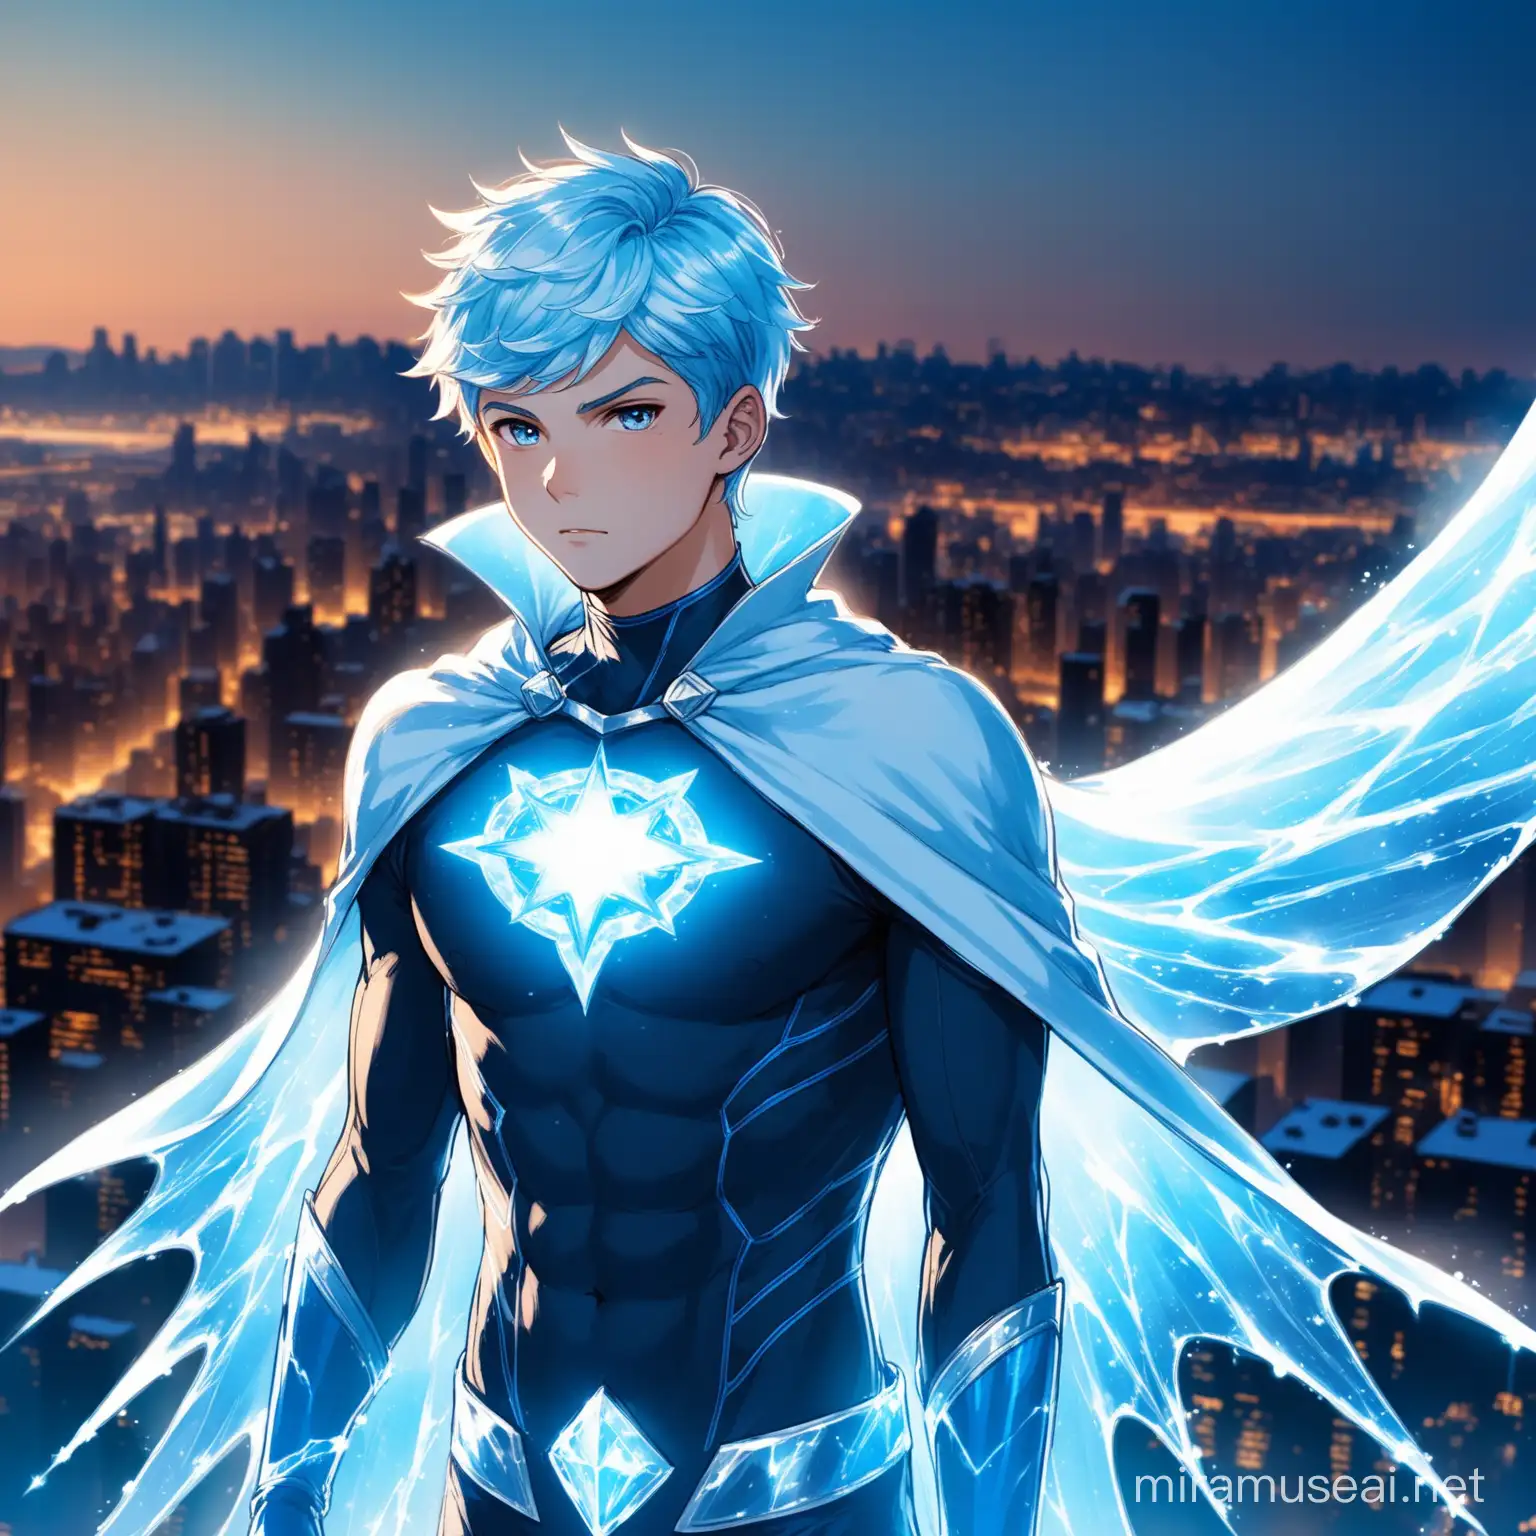 male twink superhero, ice powers, dramatic cape, no mask, tight blue and white costume, rim lighting, city background